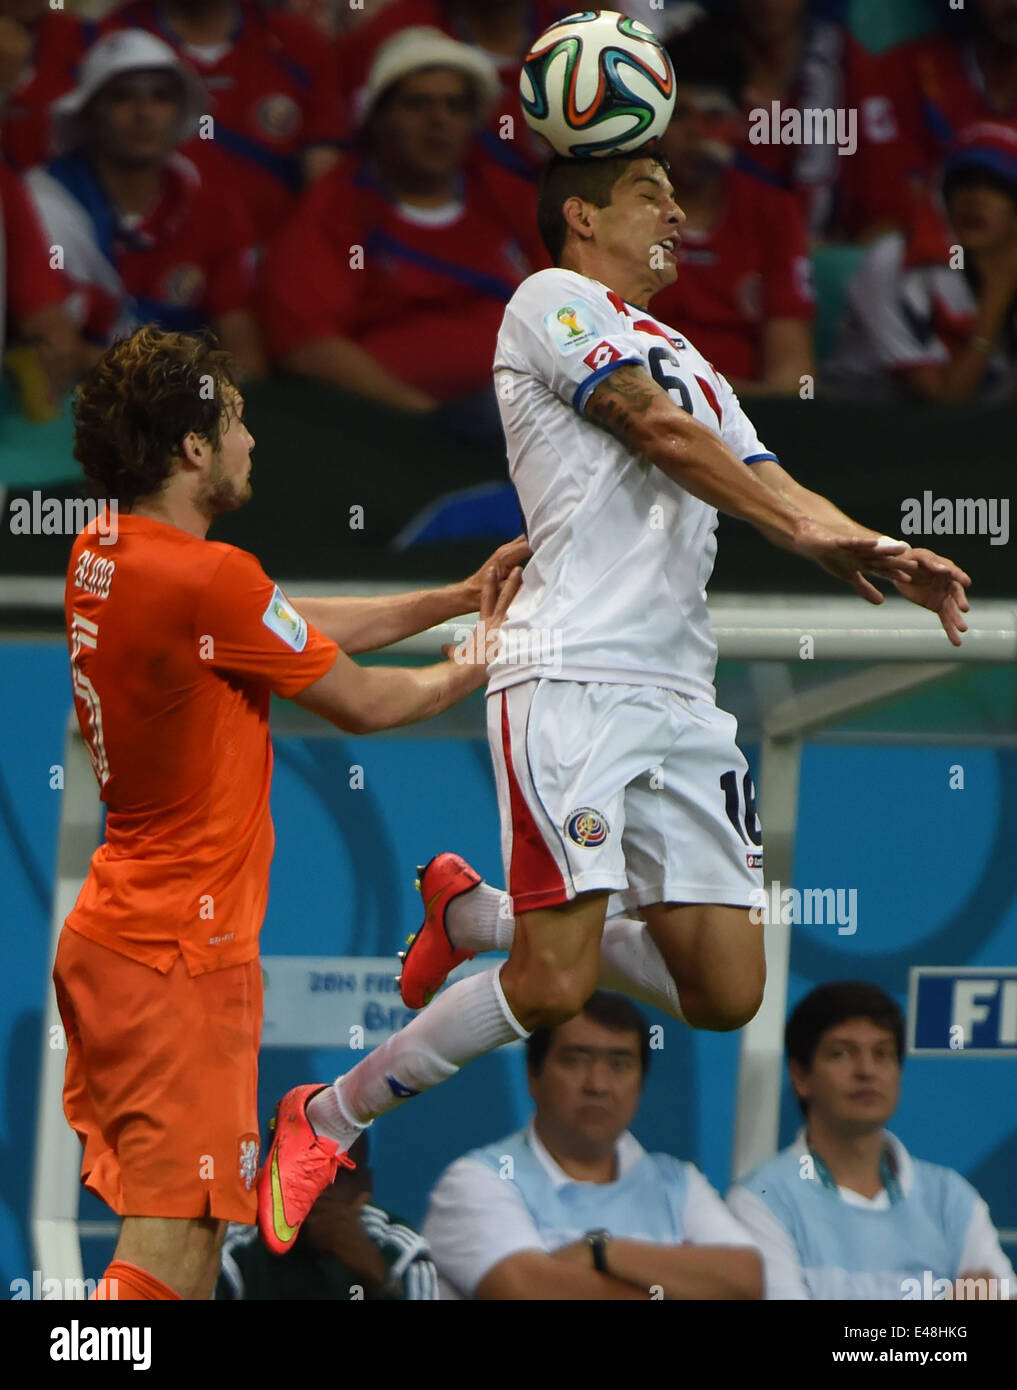 Salvador, Brazil. 5th July, 2014. Costa Rica's Christian Gamboa (up) heads the ball during a quarter-finals match between Netherlands and Costa Rica of 2014 FIFA World Cup at the Arena Fonte Nova Stadium in Salvador, Brazil, on July 5, 2014. Credit:  Guo Yong/Xinhua/Alamy Live News Stock Photo